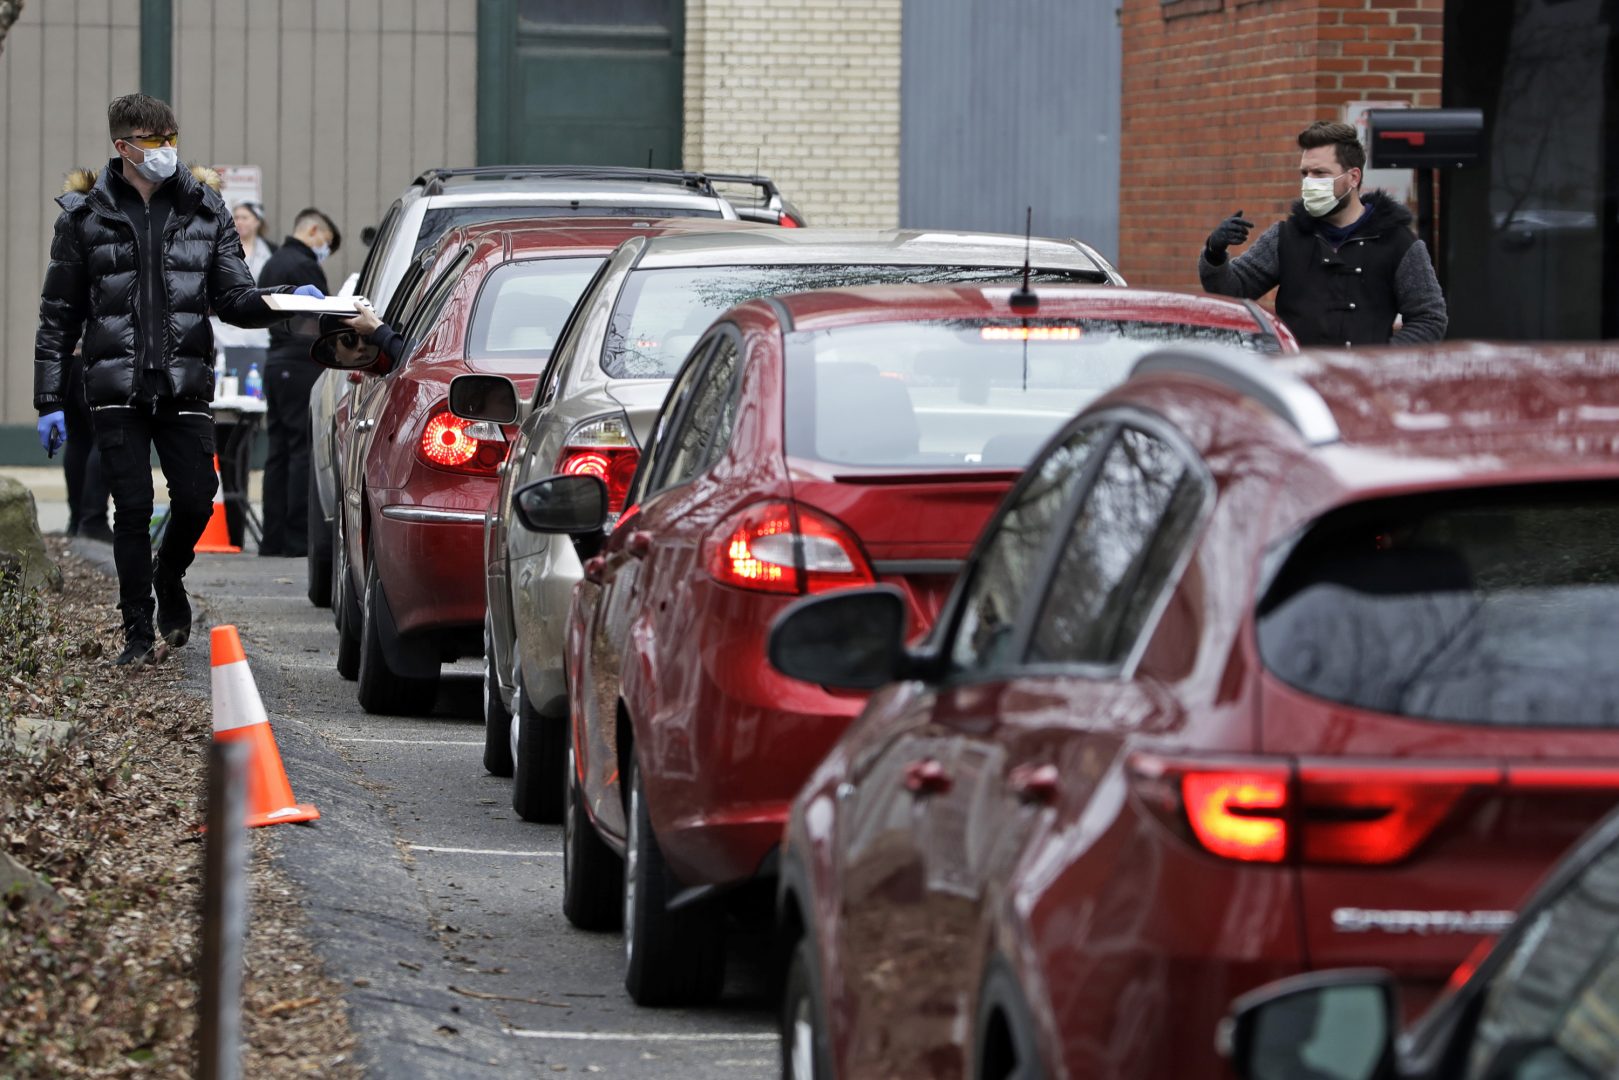 Cars line up outside the Central Outreach Wellness Center on the Northside of Pittsburgh, Monday, March 16, 2020, for drive-by testing for COVID-19. The testing, that is limited to 100 kits at present, is being done in partnership with Quest Diagnostics, one of the commercial laboratory companies that have offered COVID-19 tests to dramatically increase the nation's capability. Central Outreach Medical Director Dr. Stacy Lane said the drive-by testing is being used to not contaminate waiting rooms. The testing is based on screening questions for symptoms of dry cough or fever, Central Outreach said.